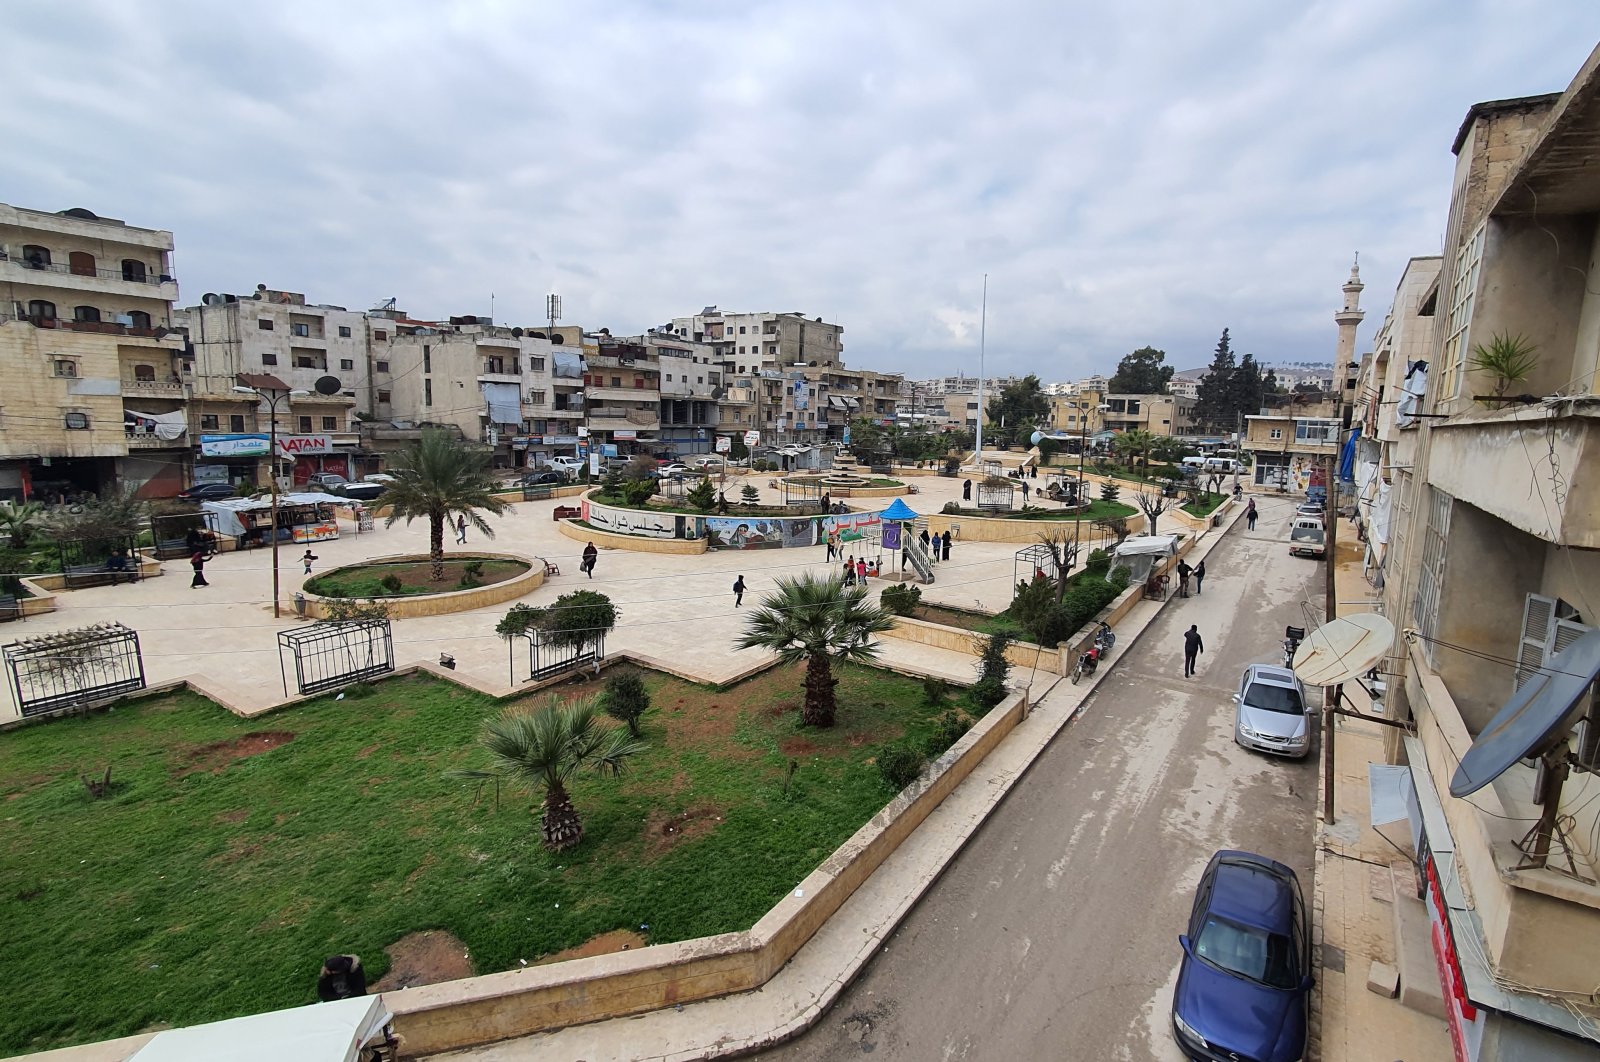 A view of the town center shows a public square in Afrin Syria, liberated by the Turkish military, March 17, 2022. (AA Photo)